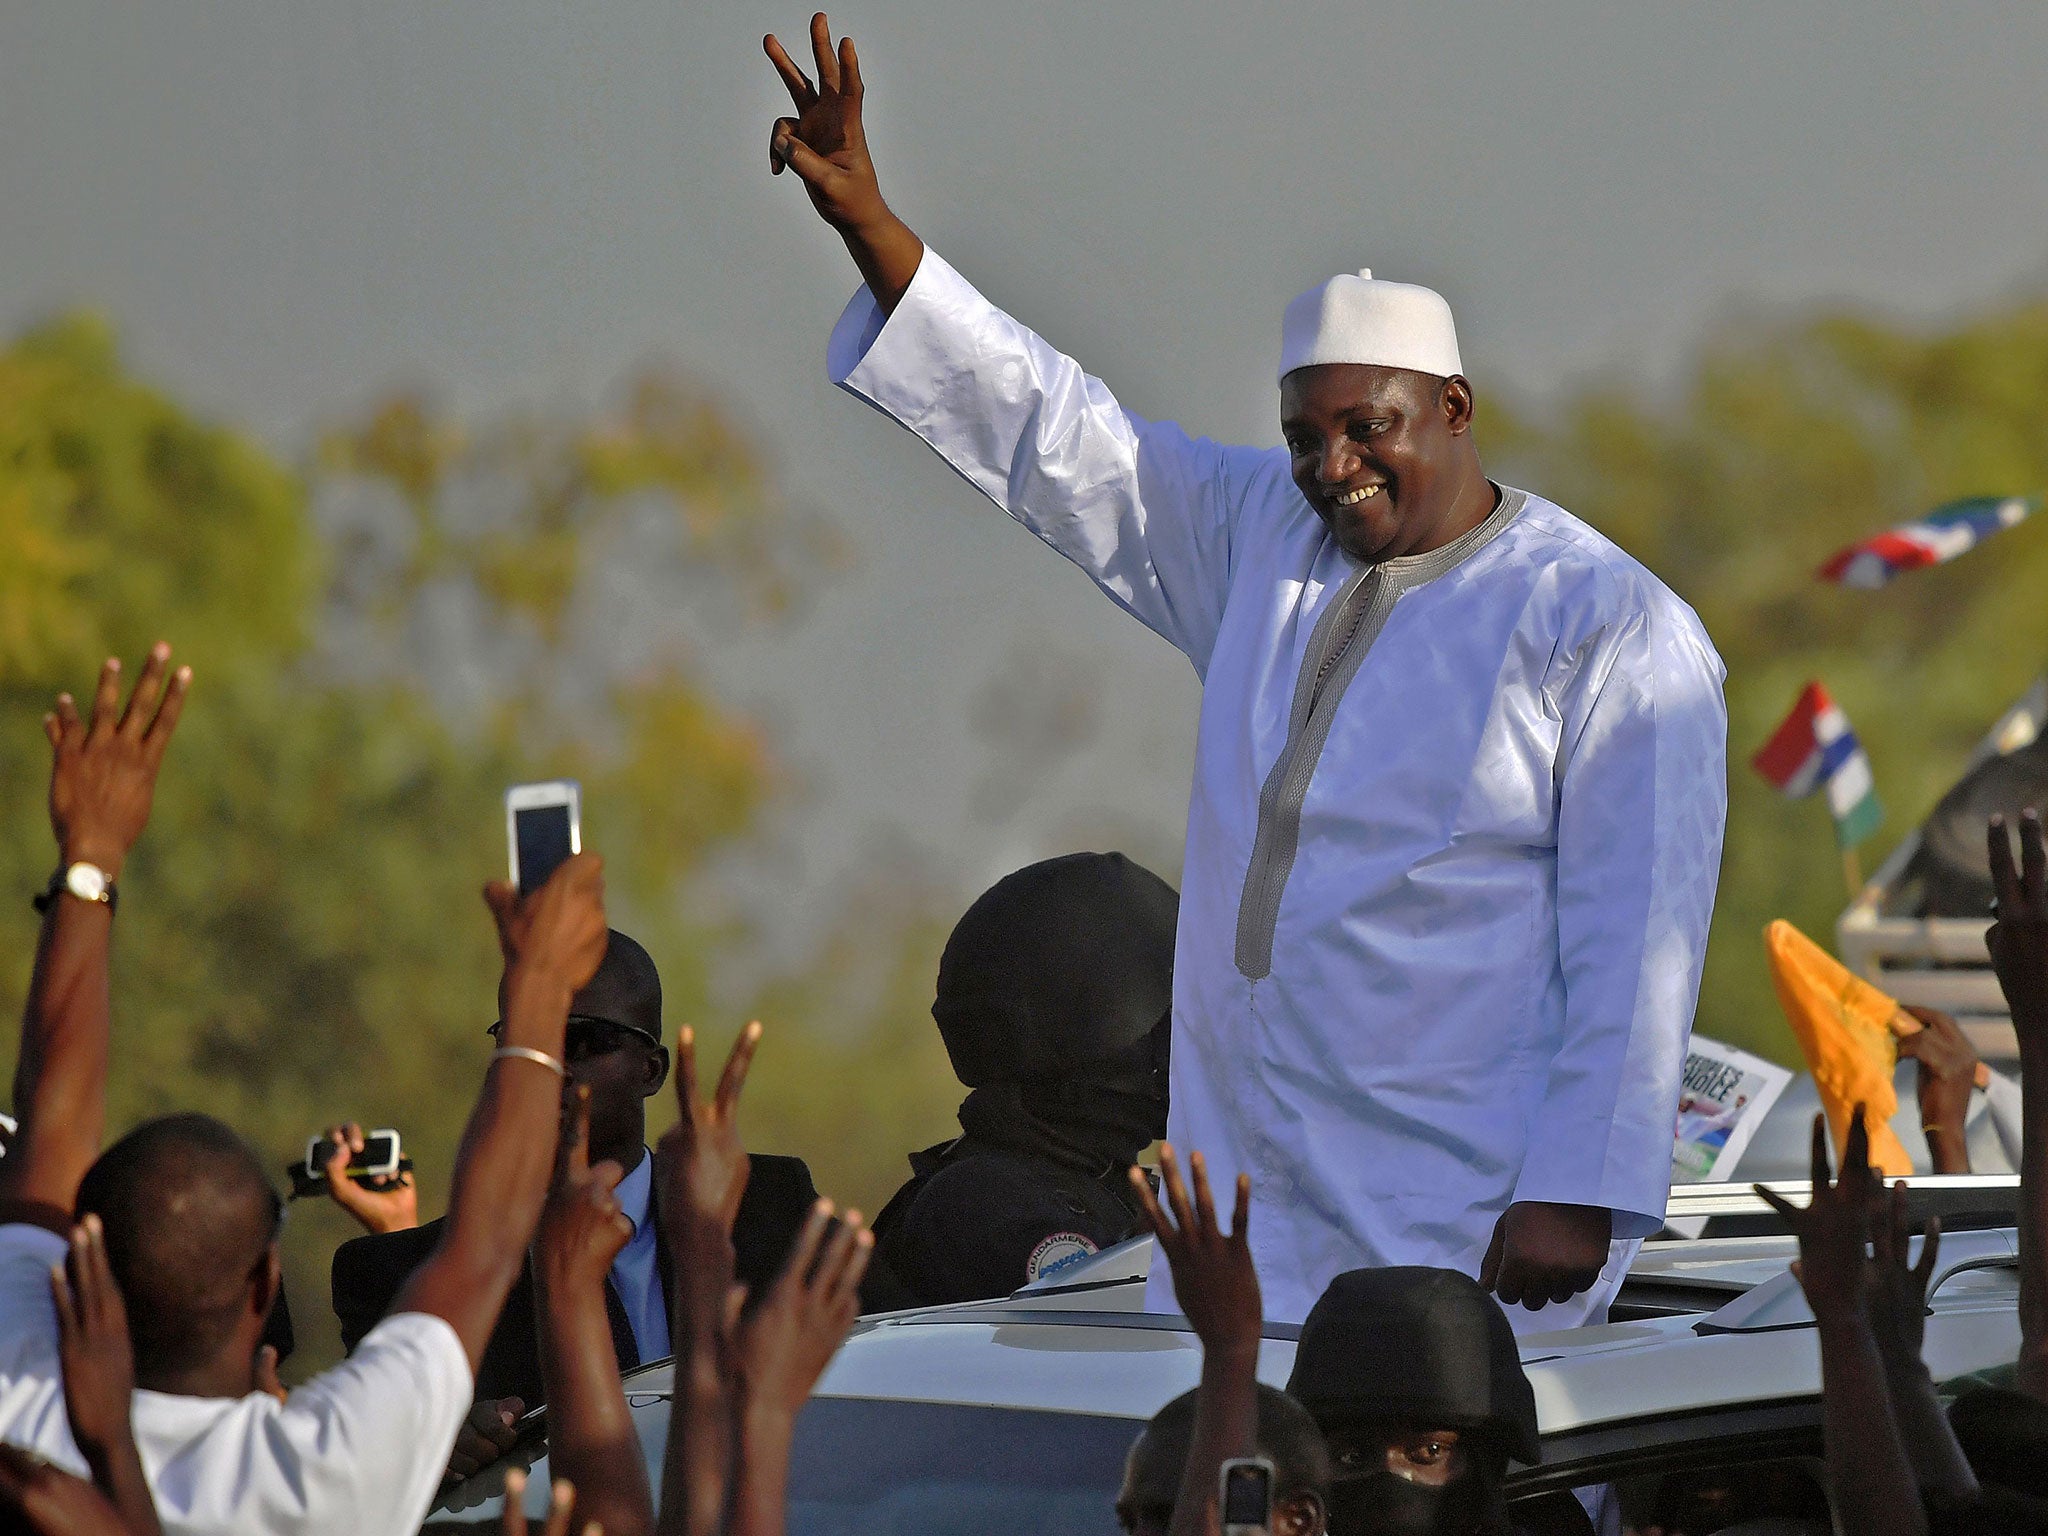 Gambia's President, Adama Barrow, says moratorium is 'first step towards abolition'